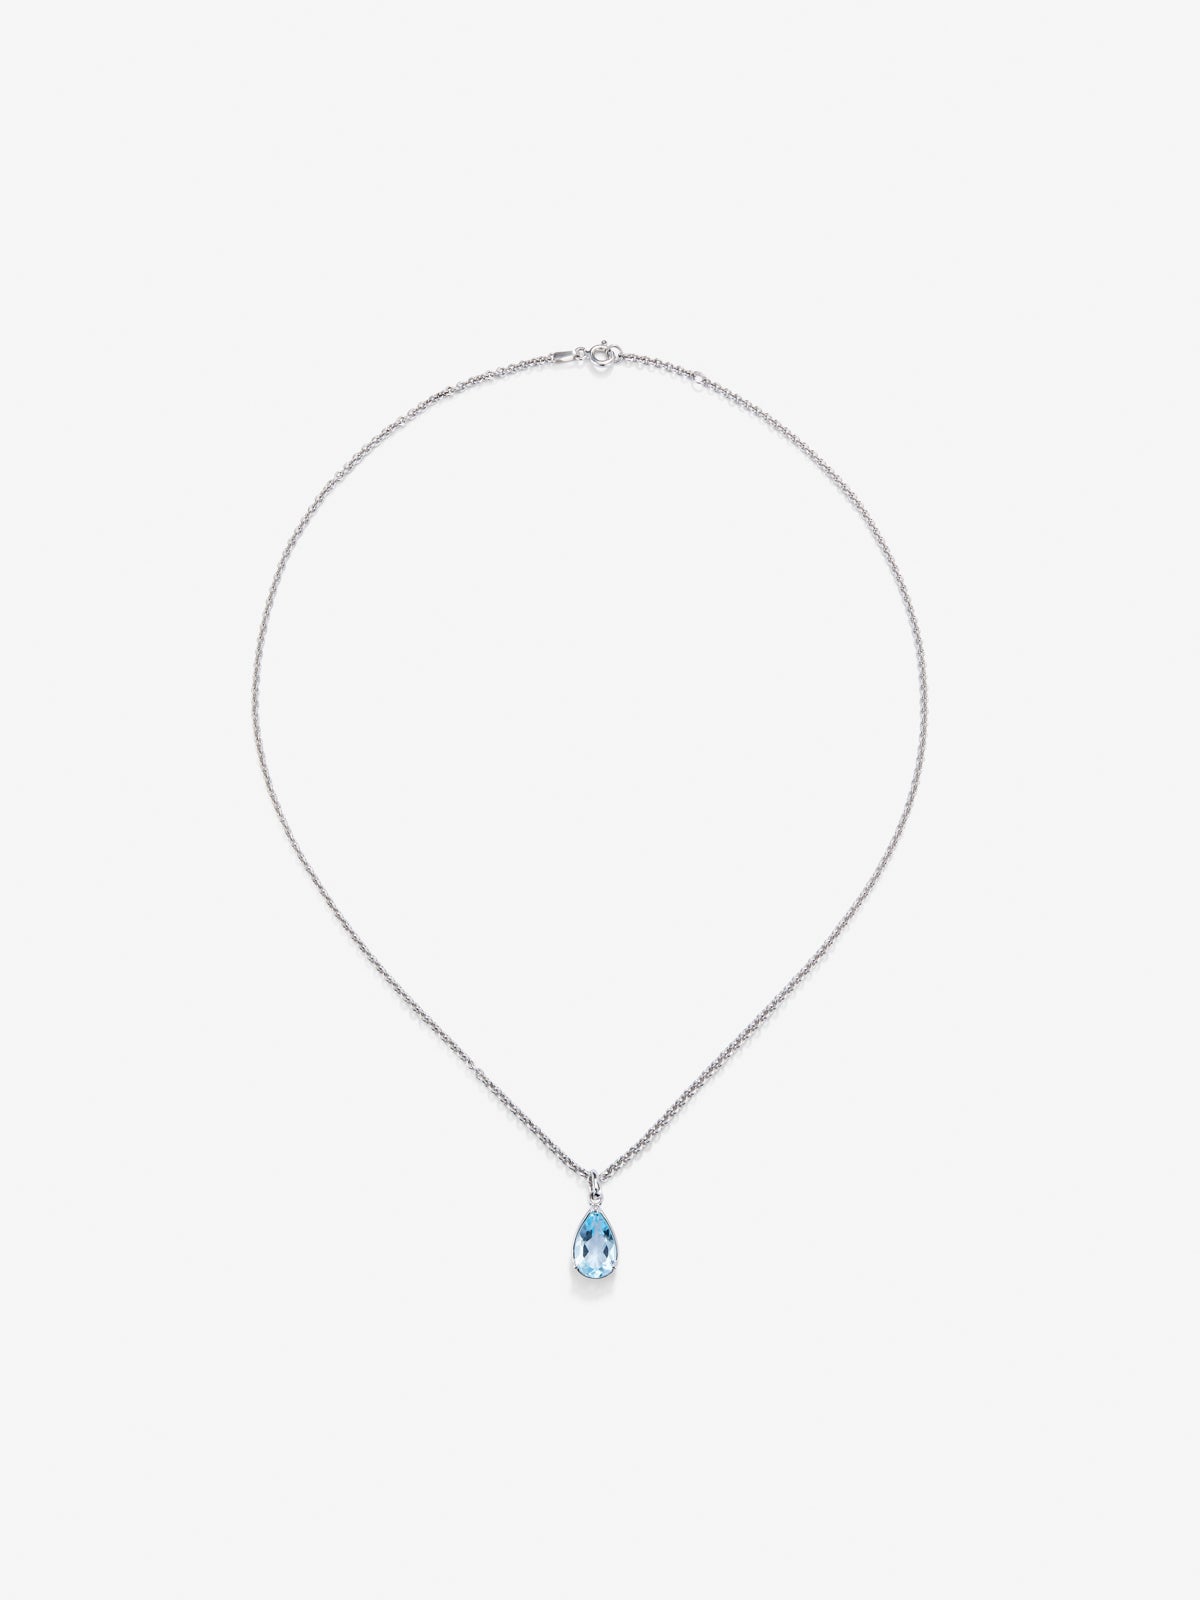 925 Silver chain pendant with topaz